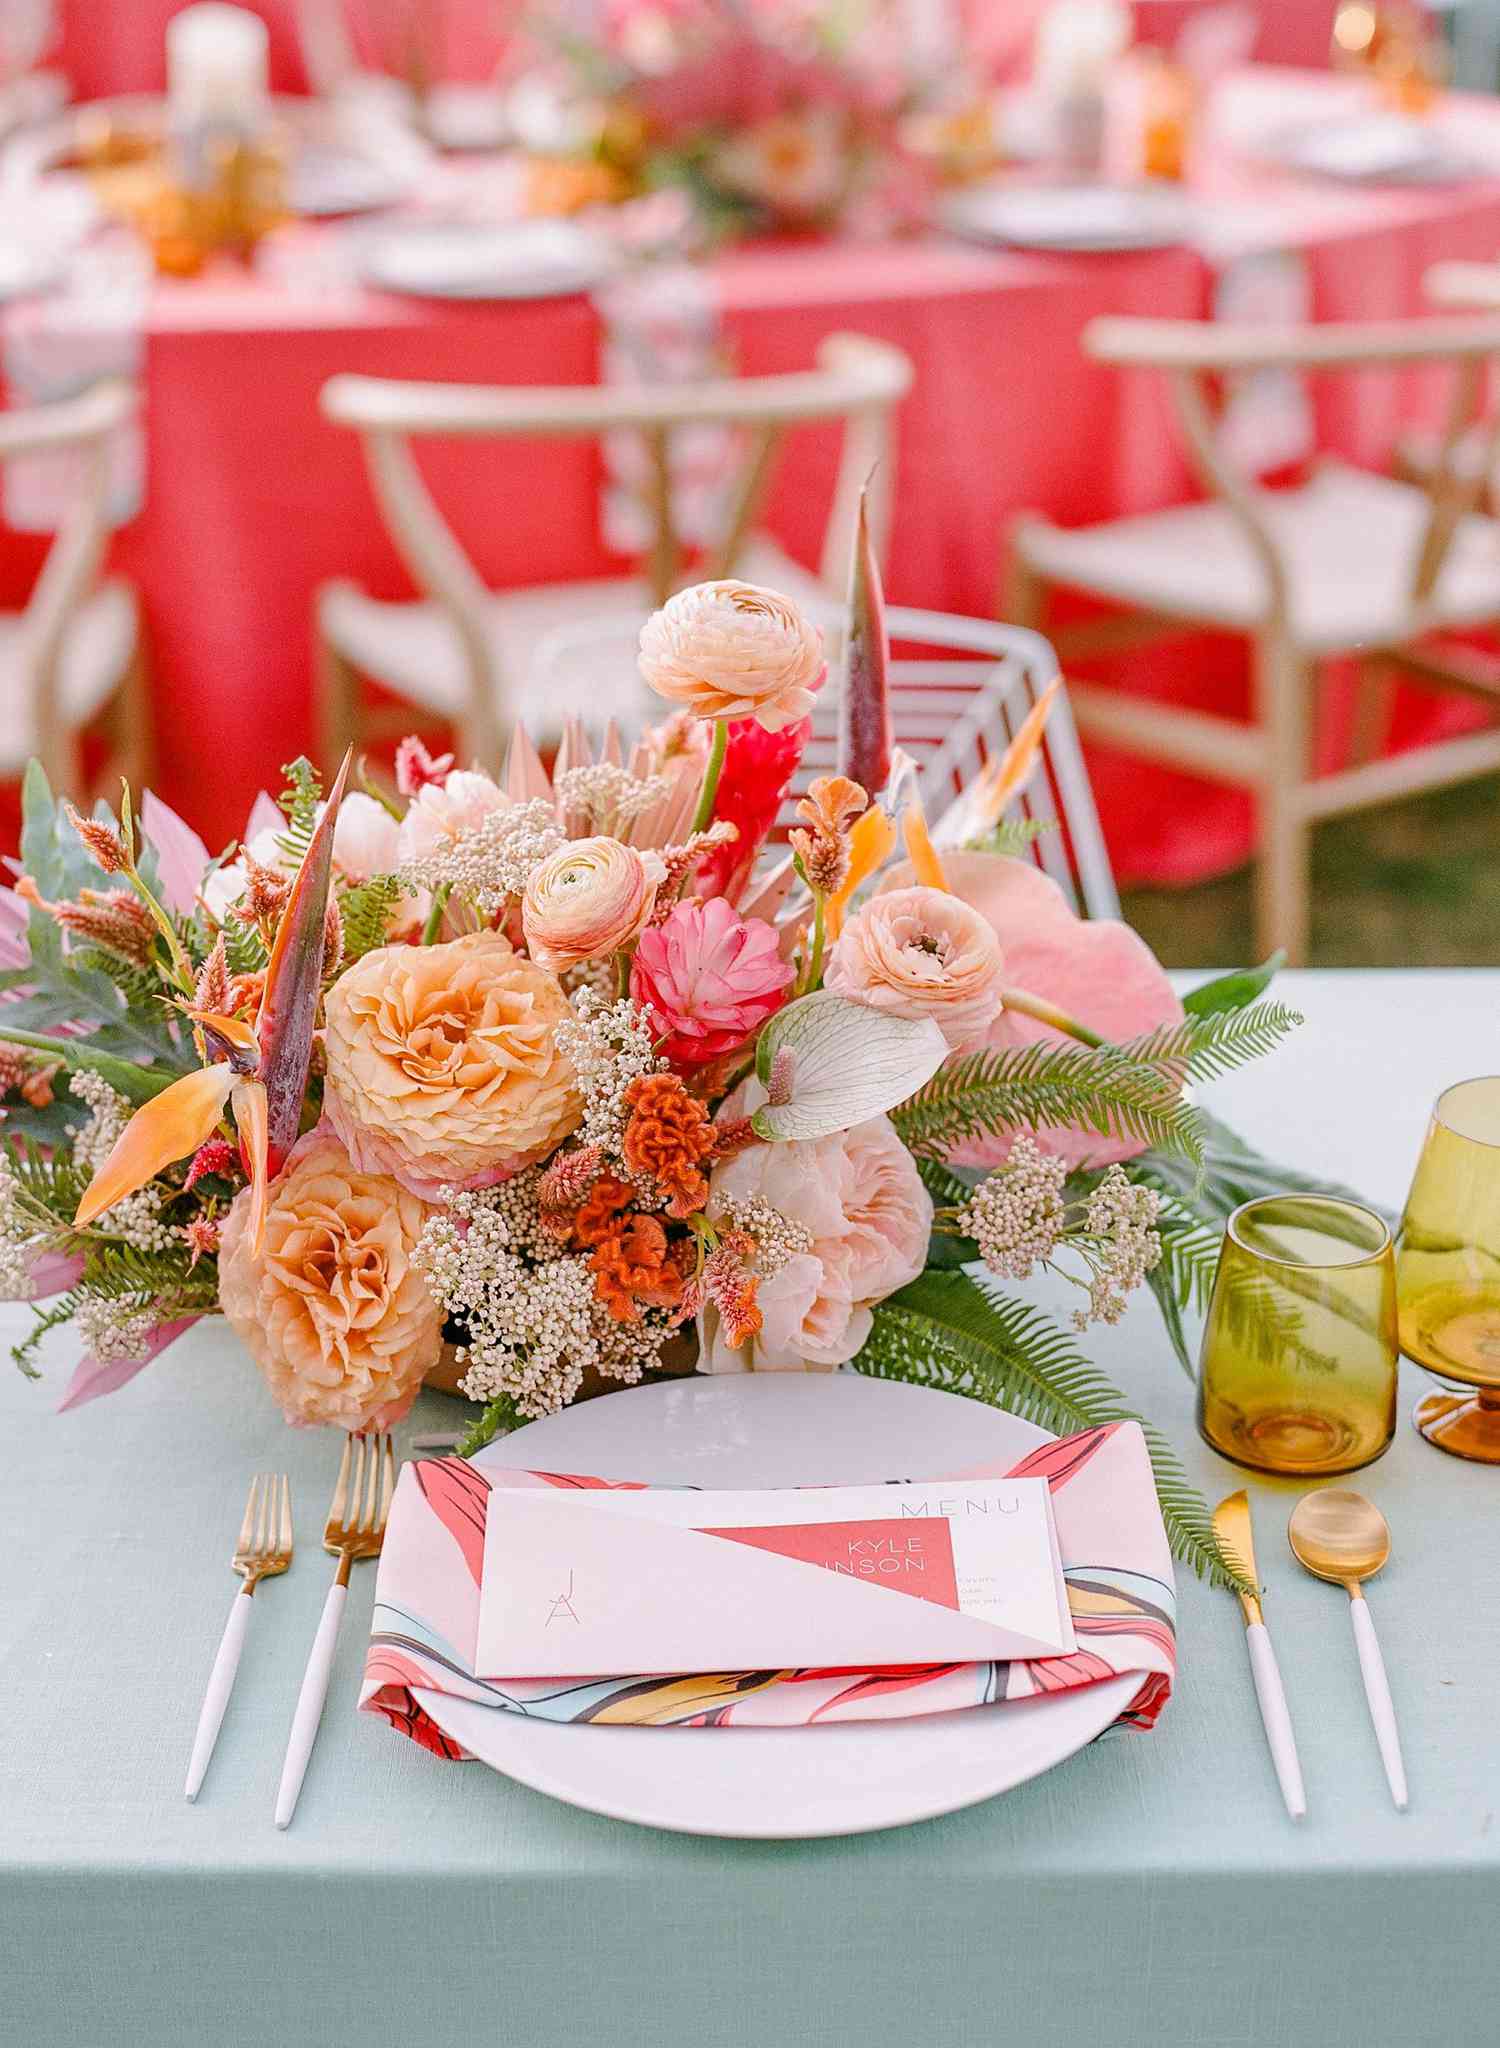 Blue table with pink and peach floral arrangement, yellow glassware, and plates with printed napkins and menu cards on top